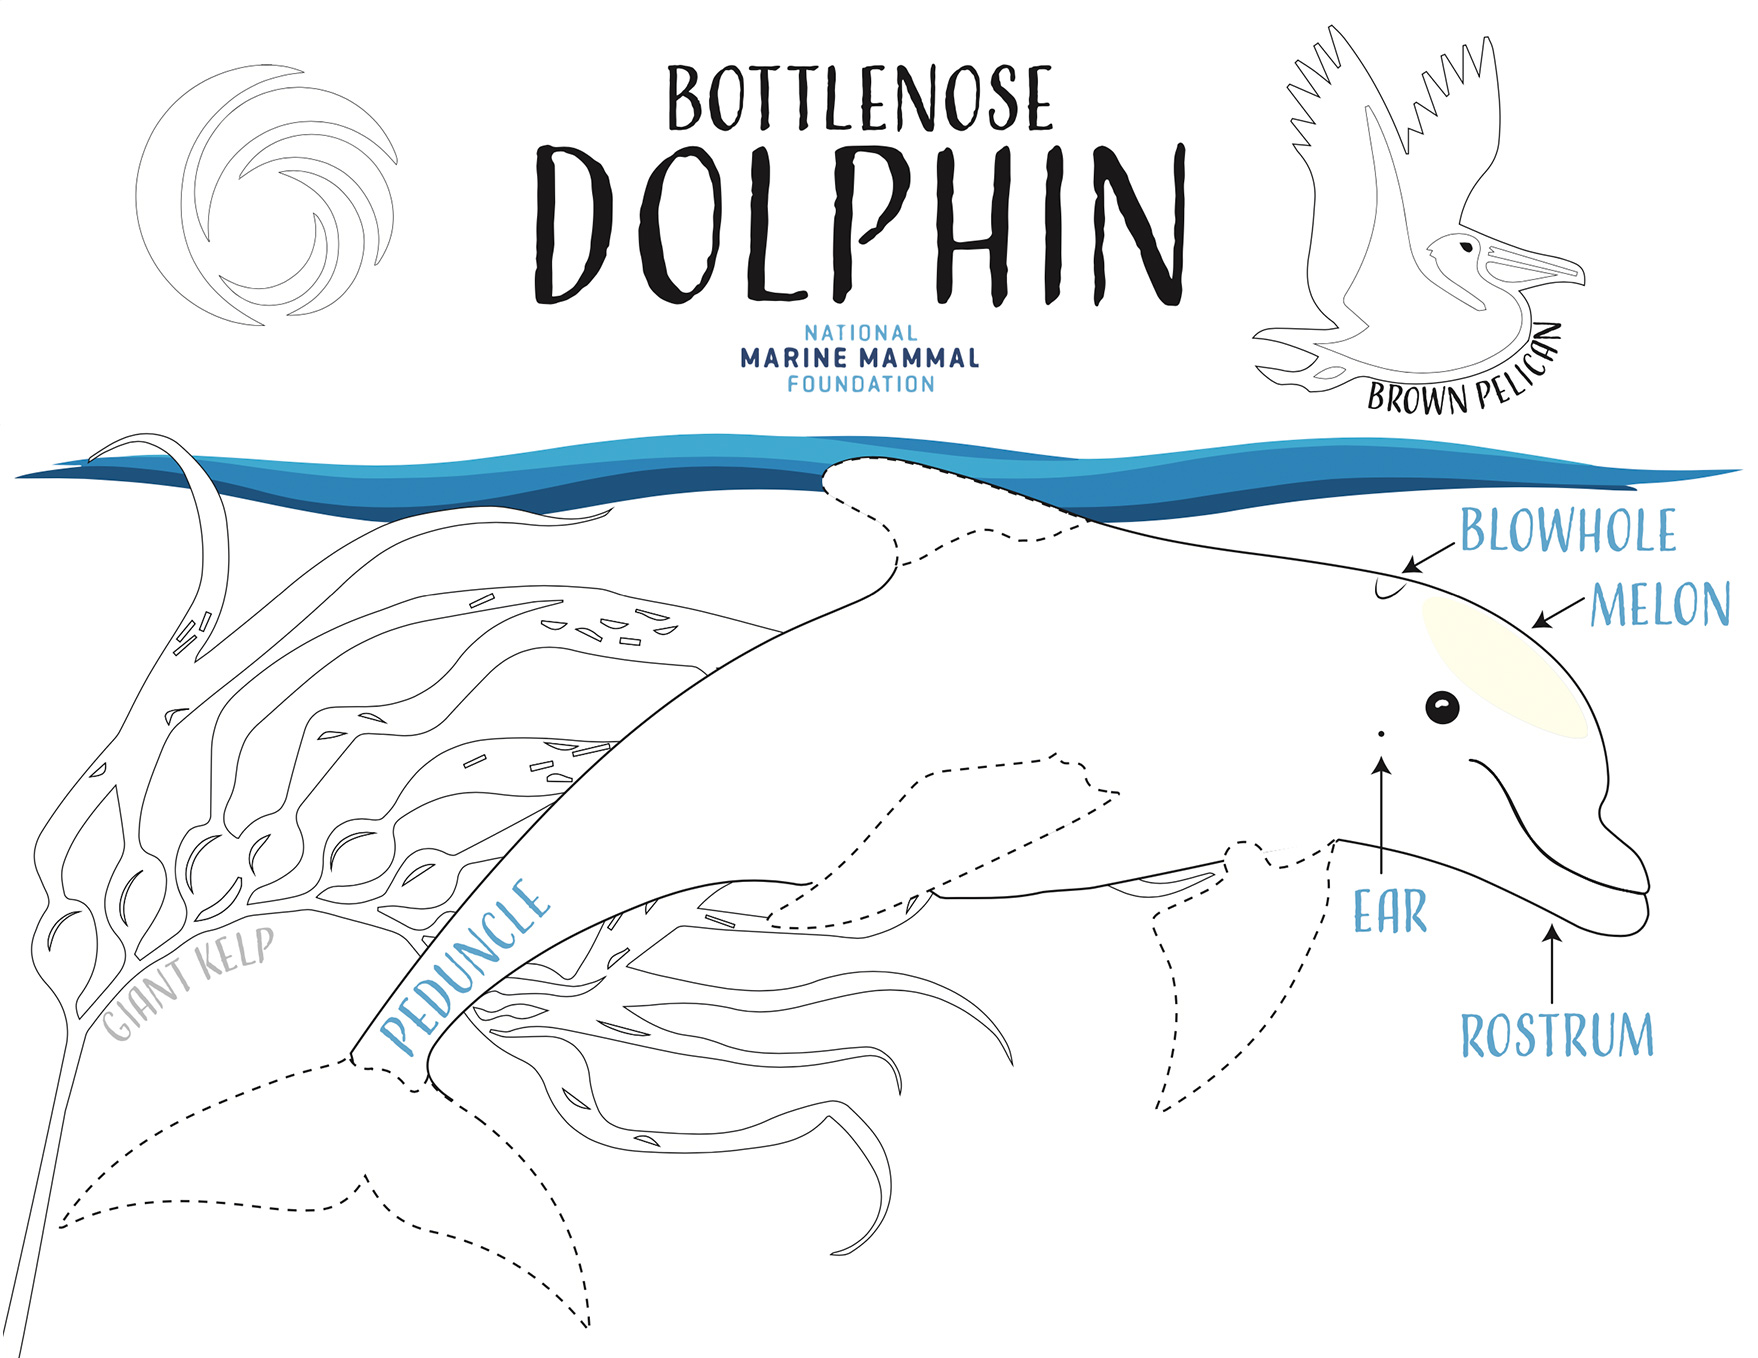 Dolphin Paper Doll Craft